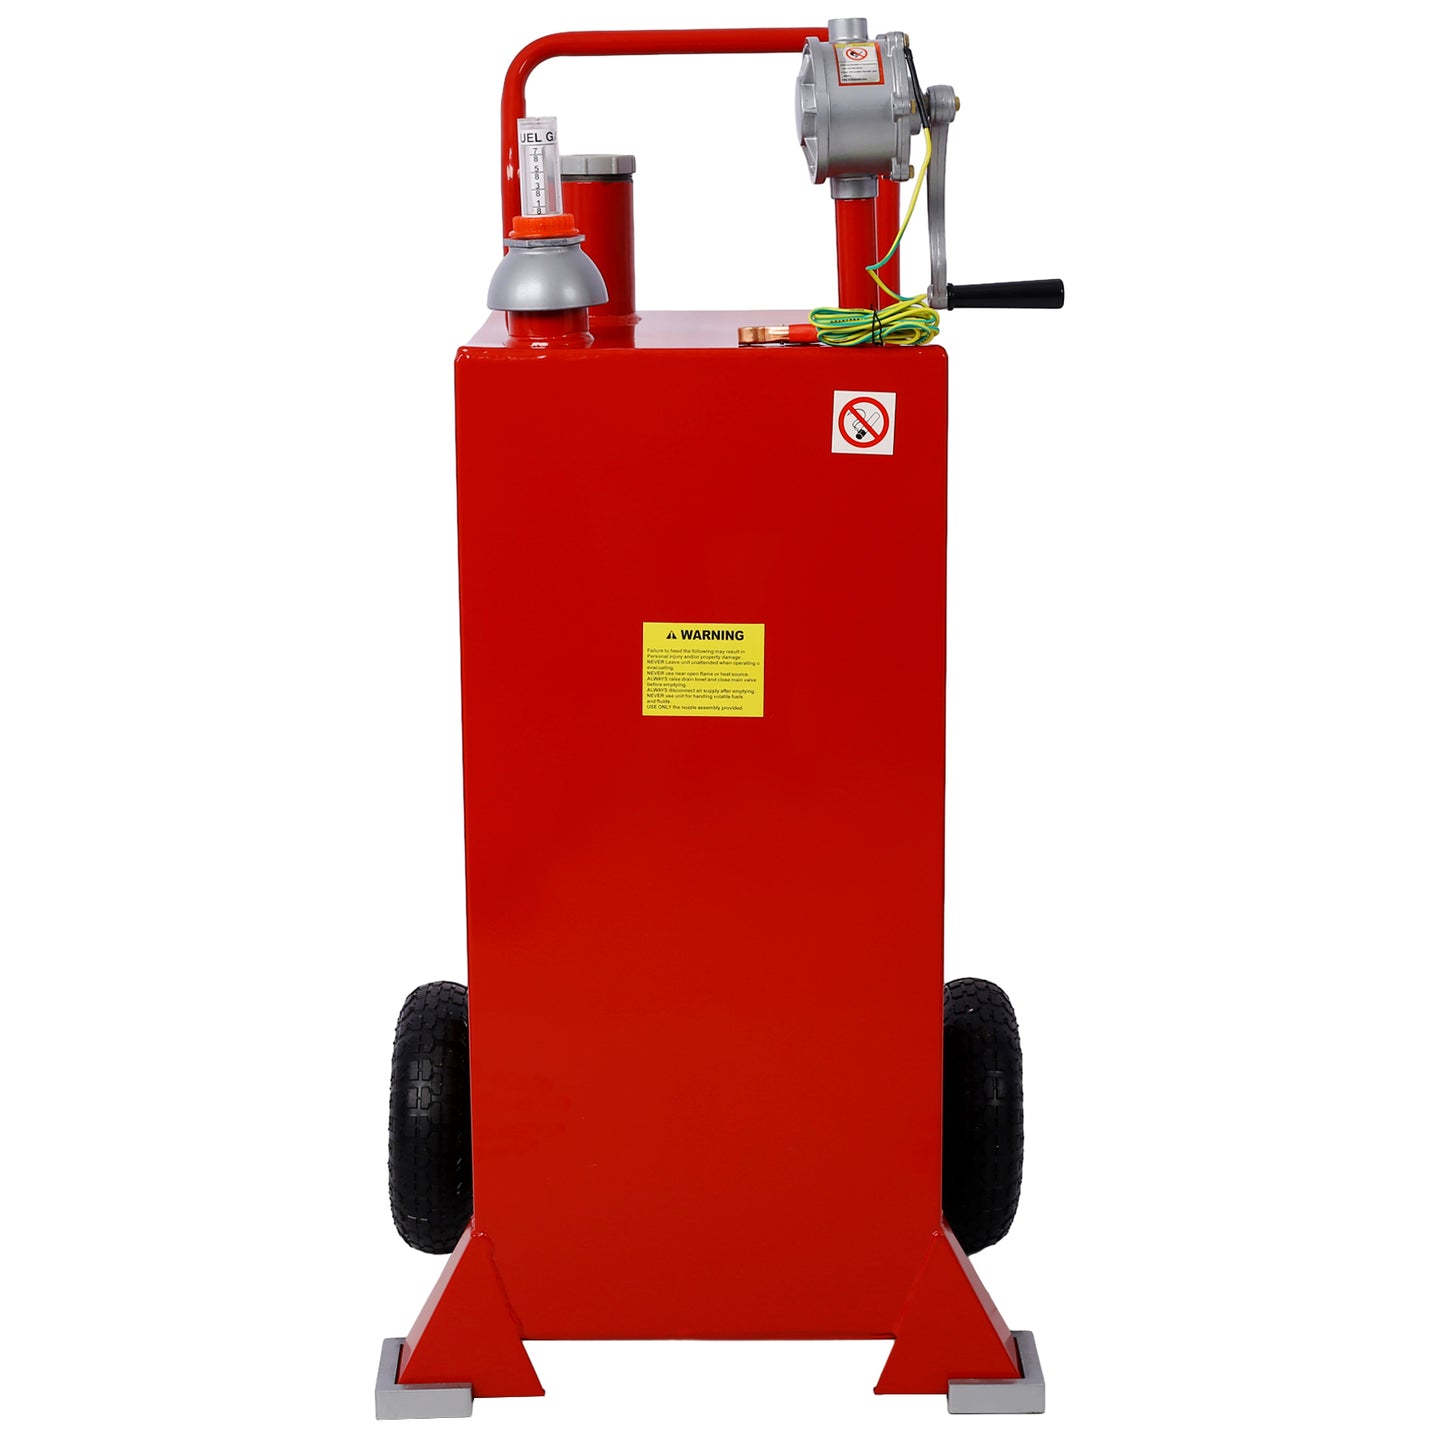 30 Gallon Gas Caddy With Wheels, Fuel Transfer Tank Gasoline Diesel Can Reversible Rotary Hand Siphon Pump, Fuel Storage Tank For Automobiles ATV Car Mowers Tractors Boat Motorcycle(Red)